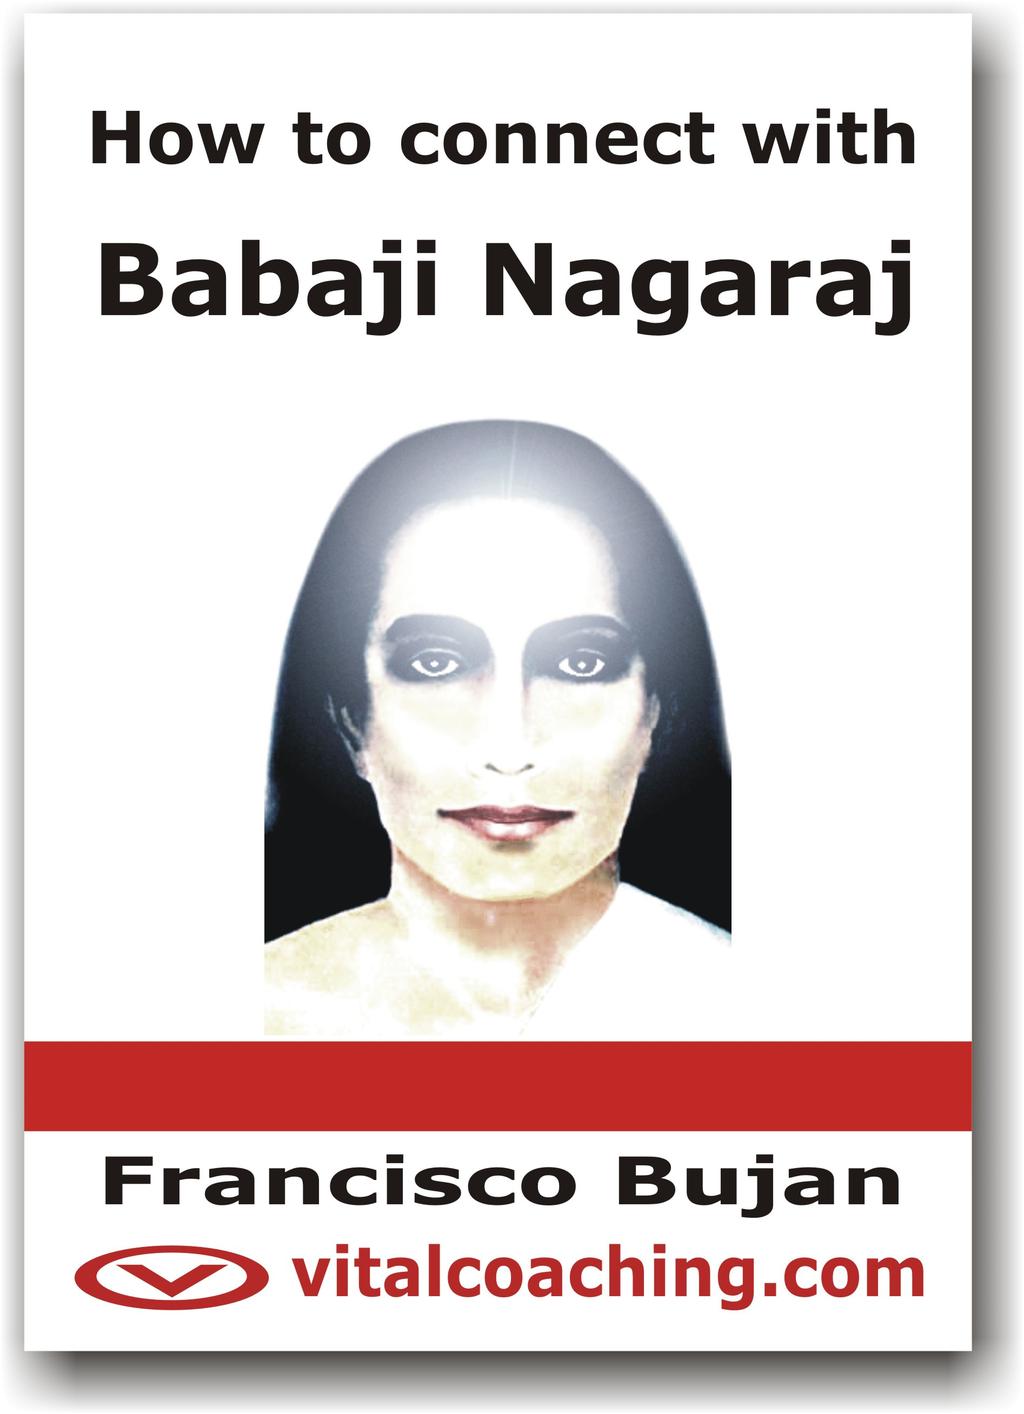 Get the complete Babaji Nagaraj book This book is only a fraction of the complete How to connect with